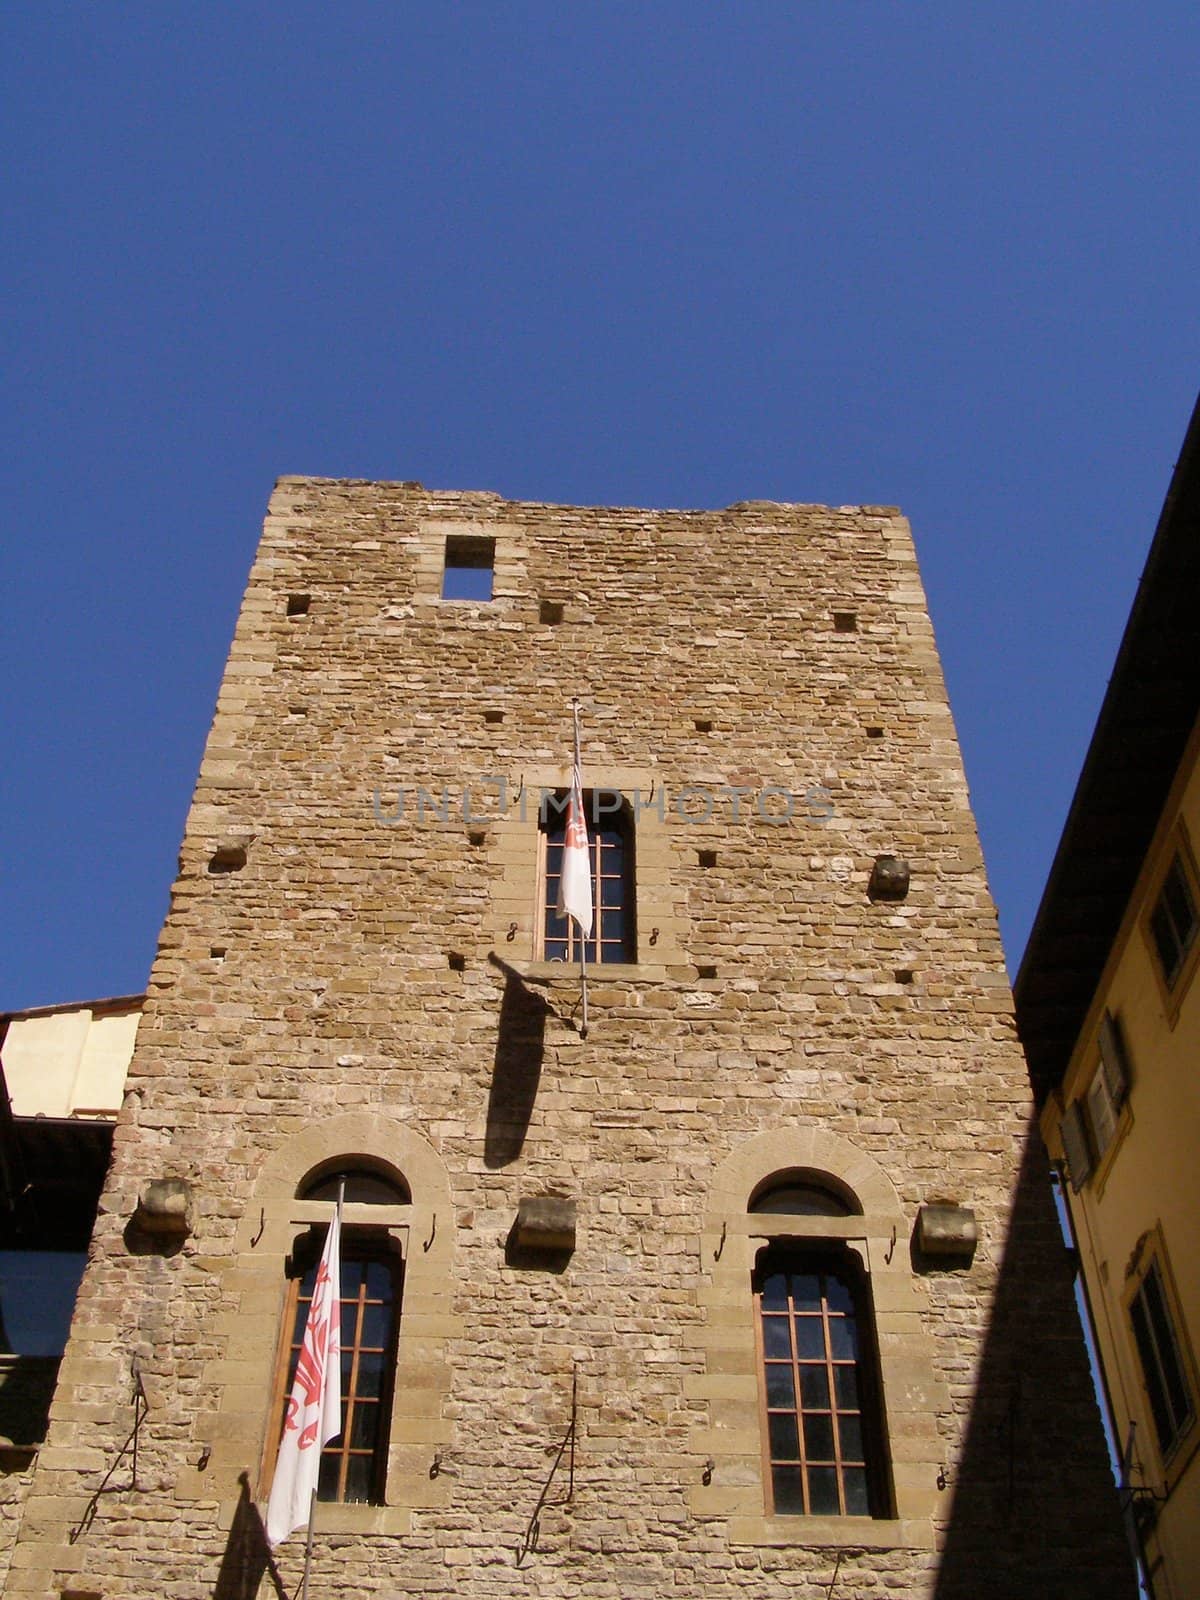 Florence, medieval heritage town in central Italy